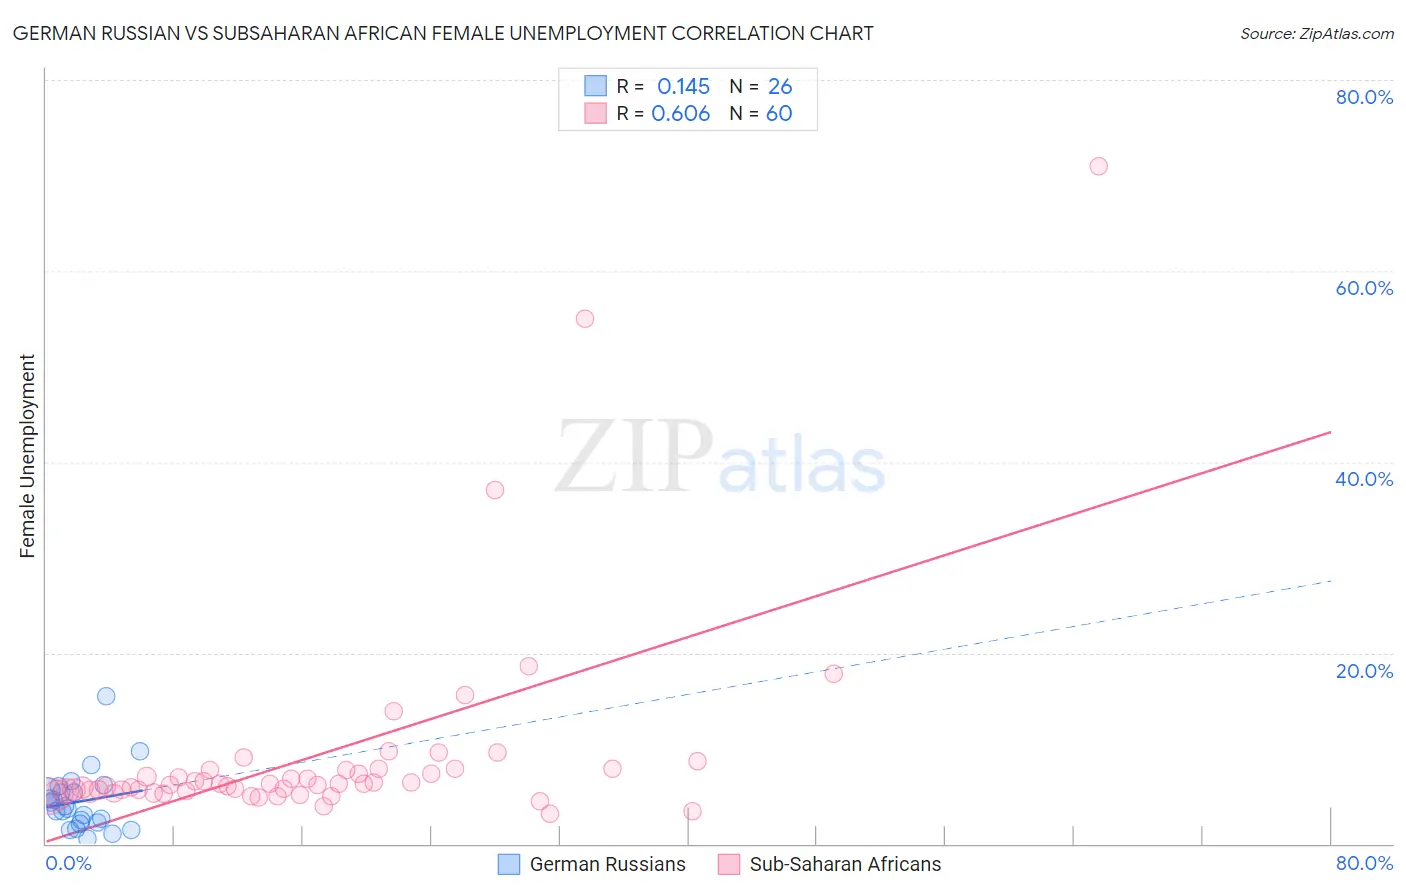 German Russian vs Subsaharan African Female Unemployment